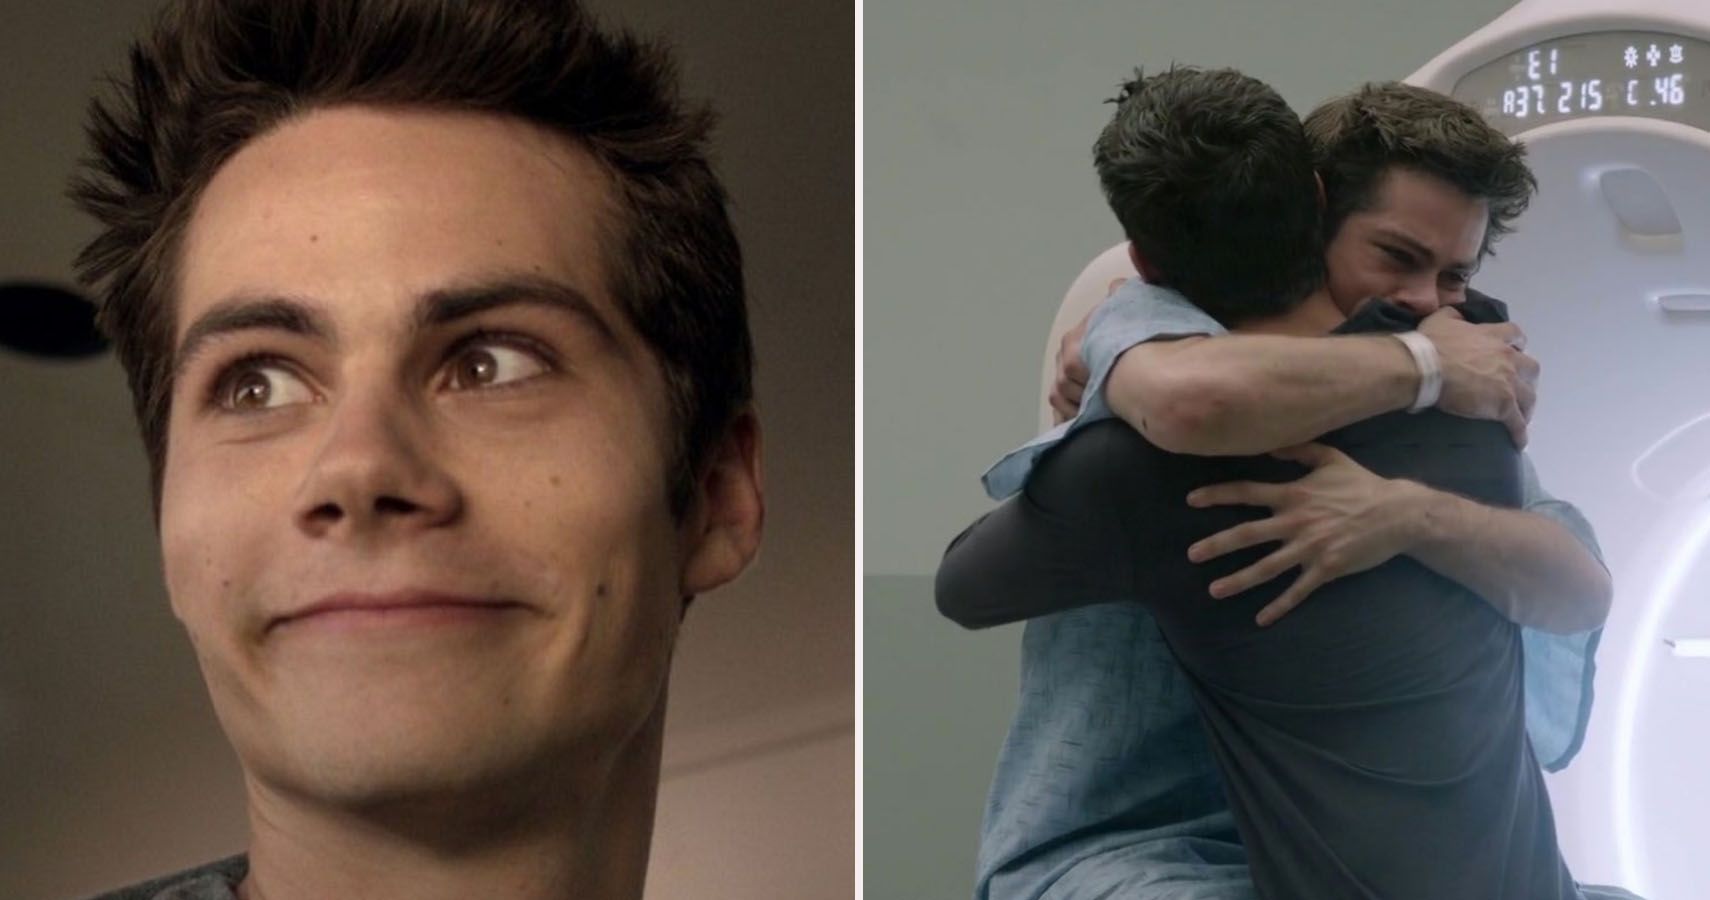 Teen Wolf 10 Things You Never Knew About Stiles Stilinski